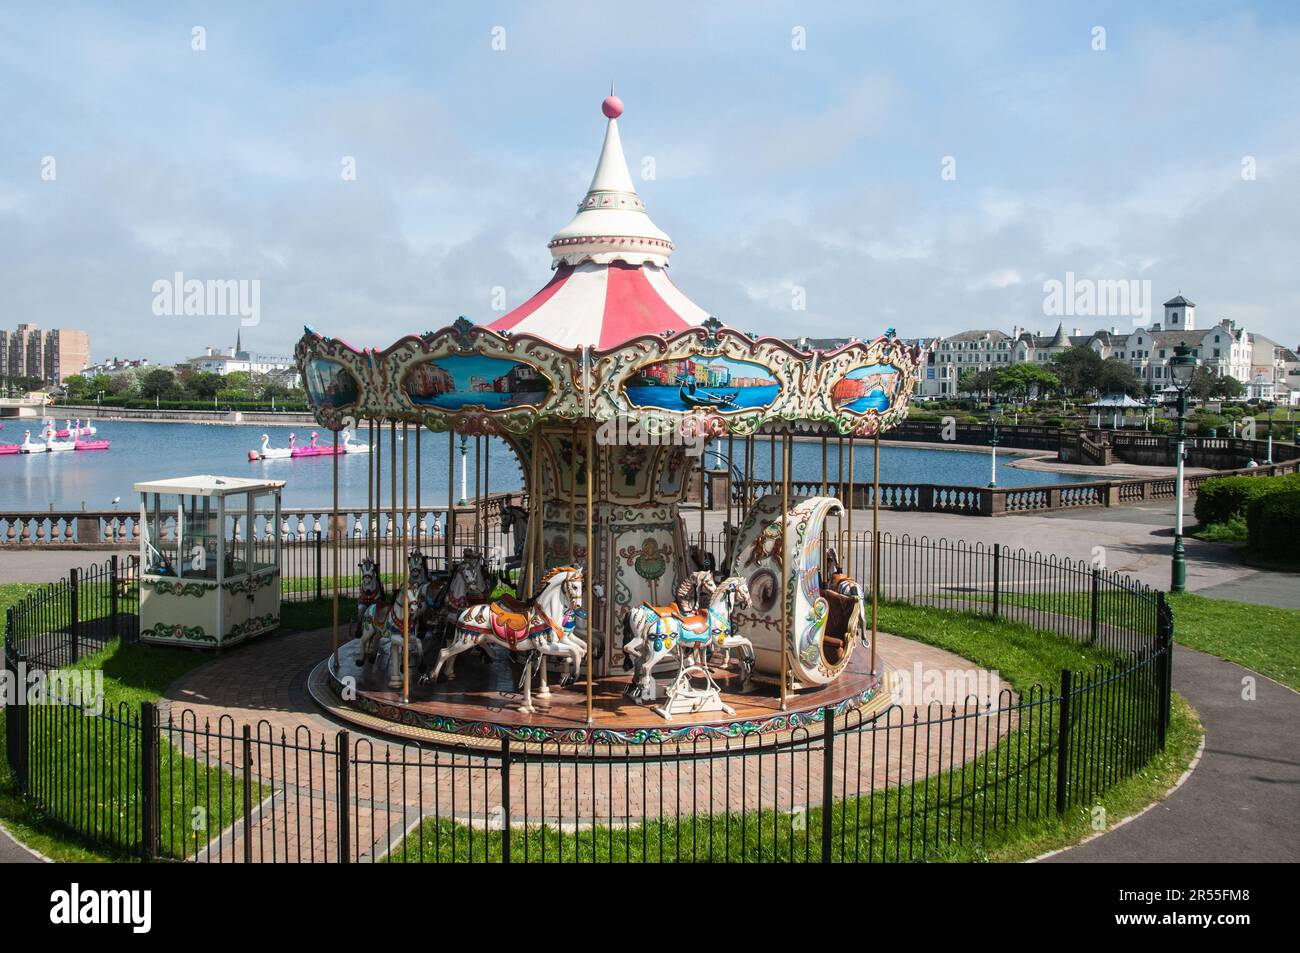 Around the UK - A traditional children's roundabout at Southport Stock Photo